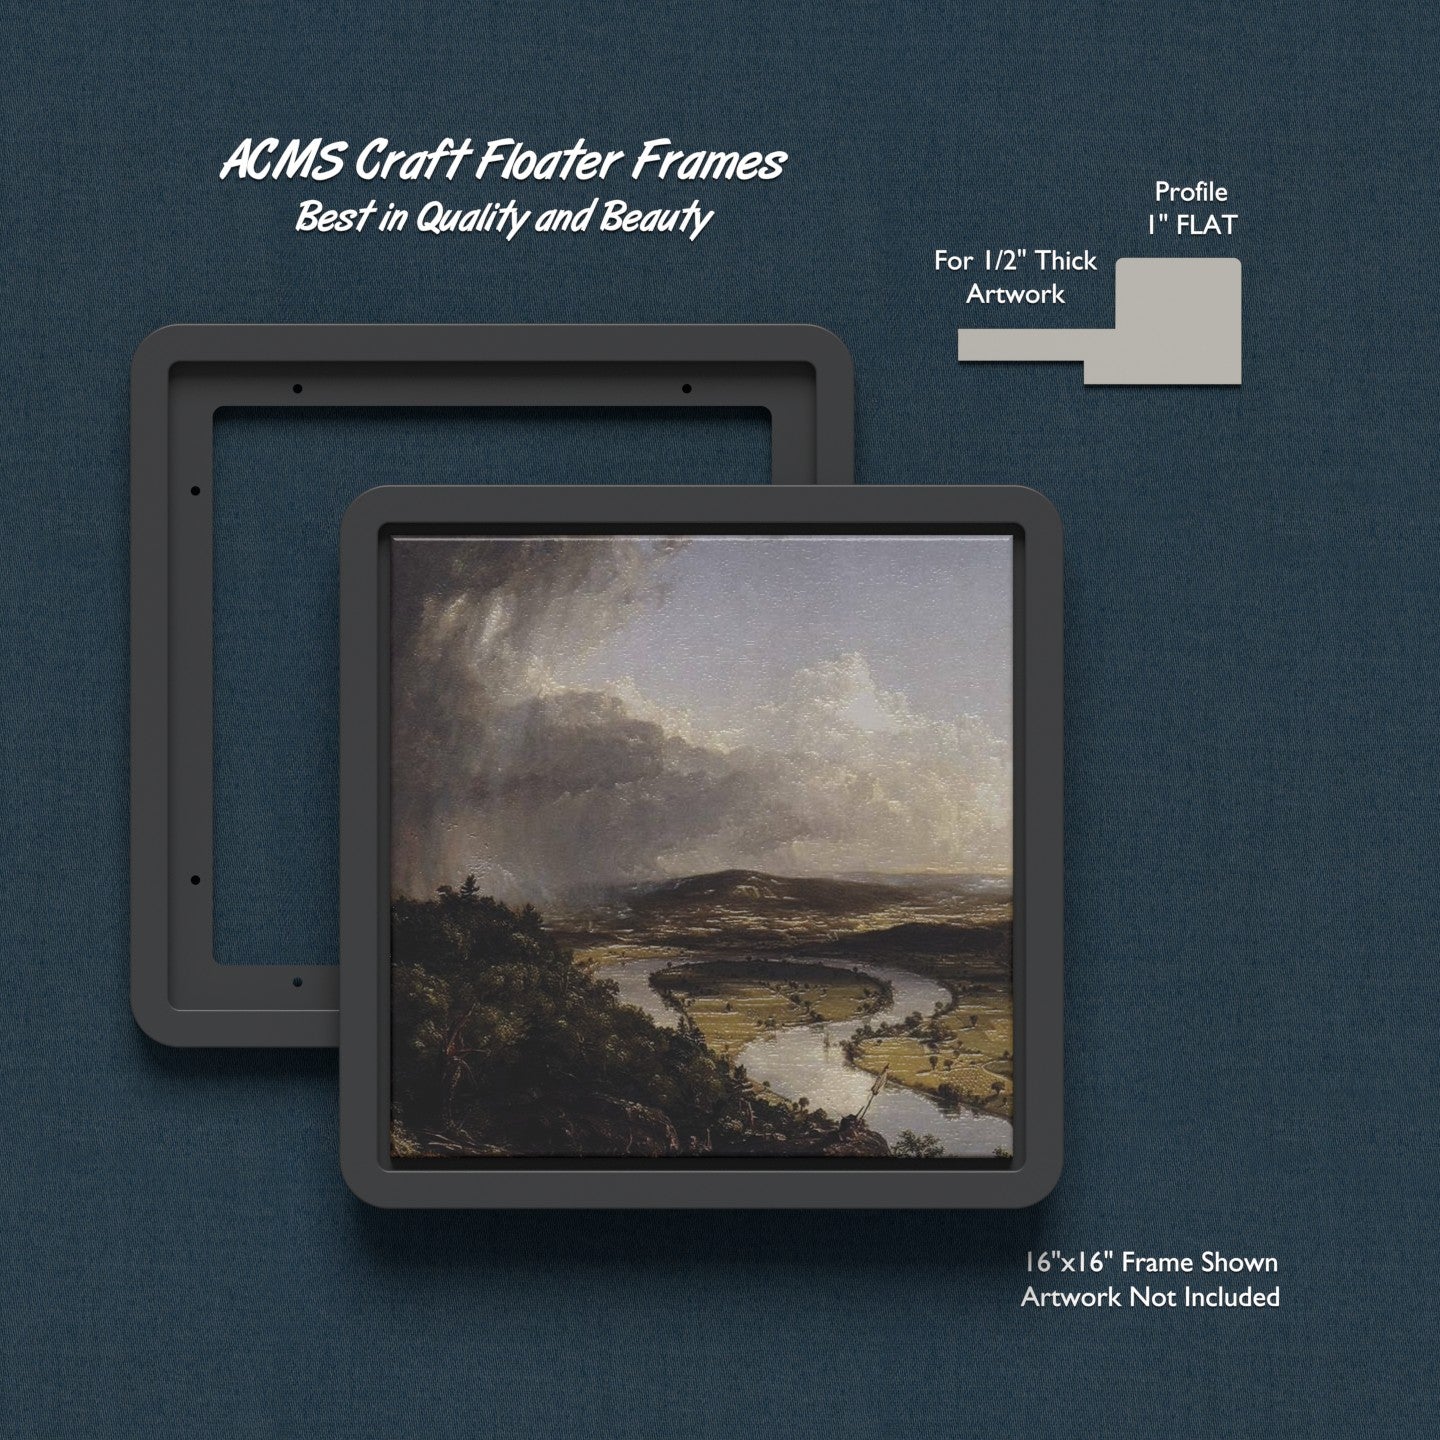 ACMS Soft Square Craft Floater Frame - For 1/2" Thick Artwork - Profile 1" FLAT